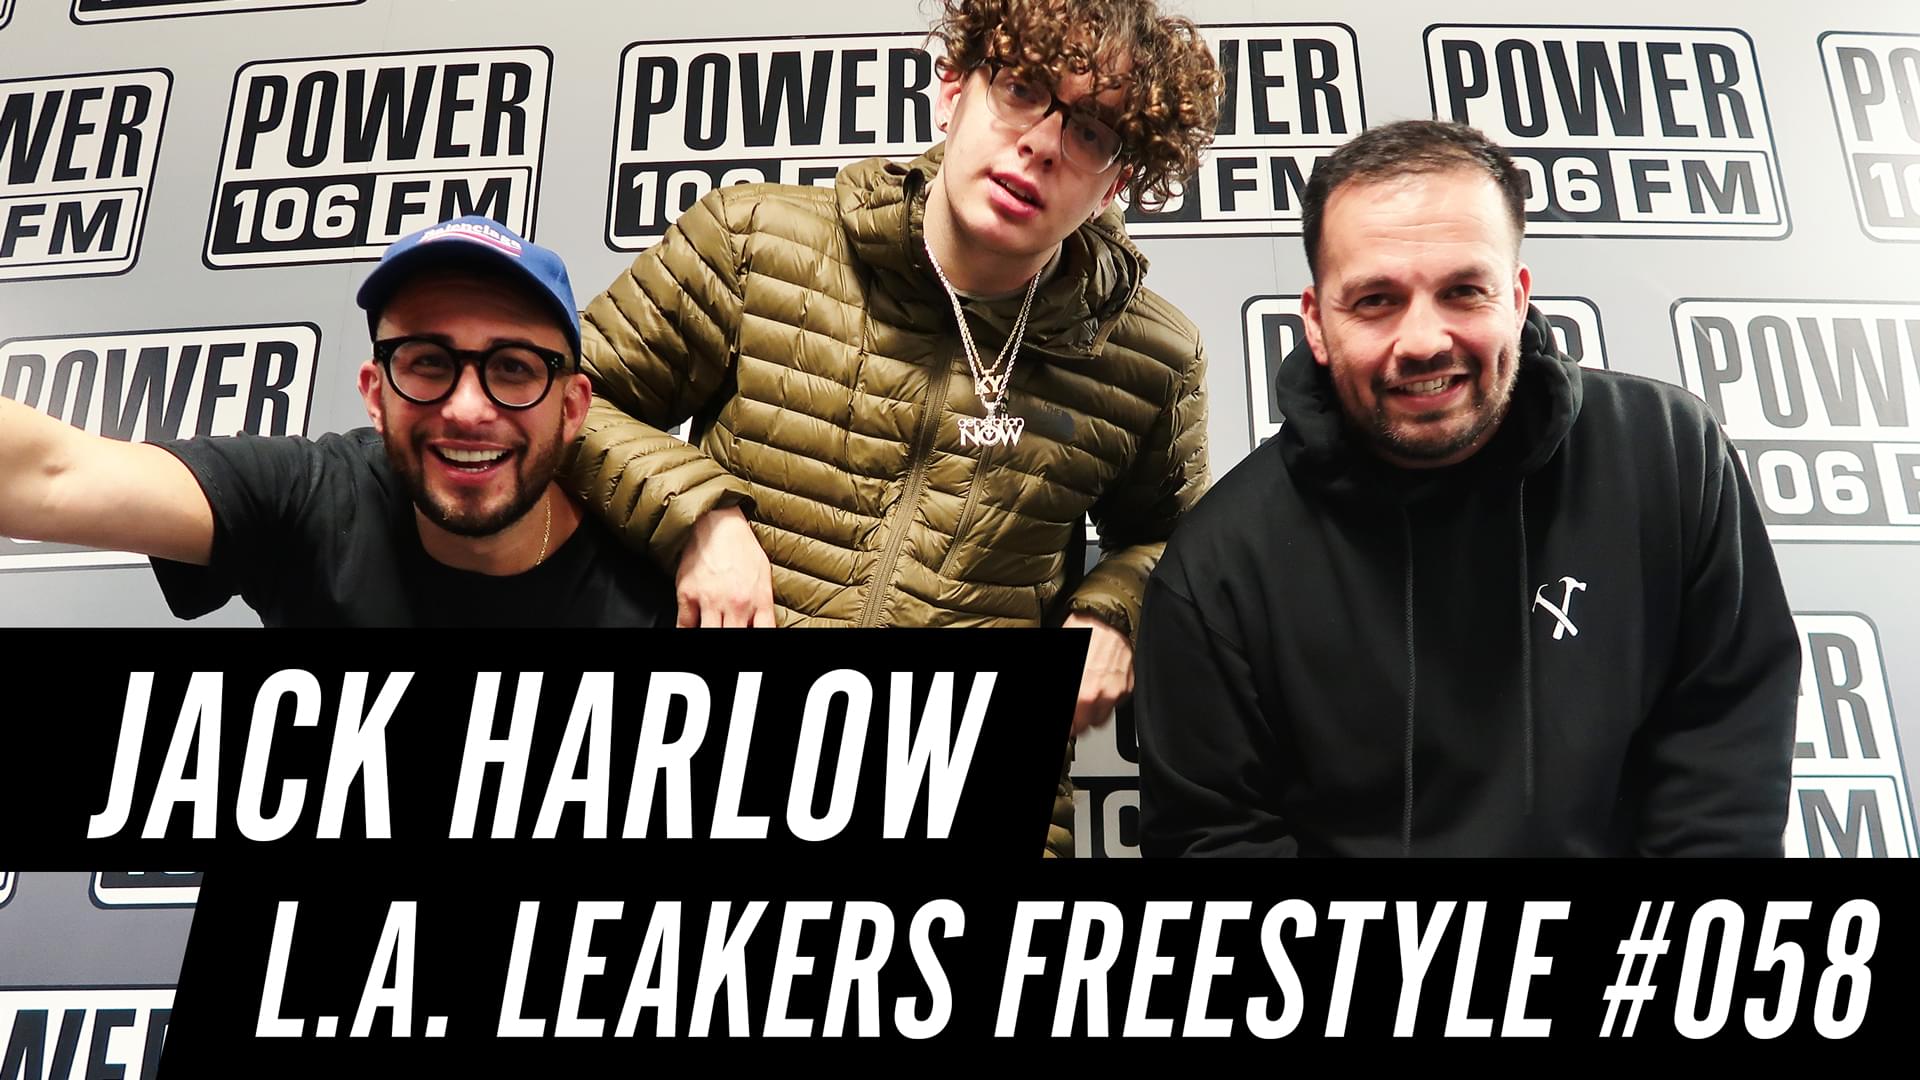 Jack Harlow Freestyle w/ The L.A. Leakers – Freestlye #058 [WATCH]